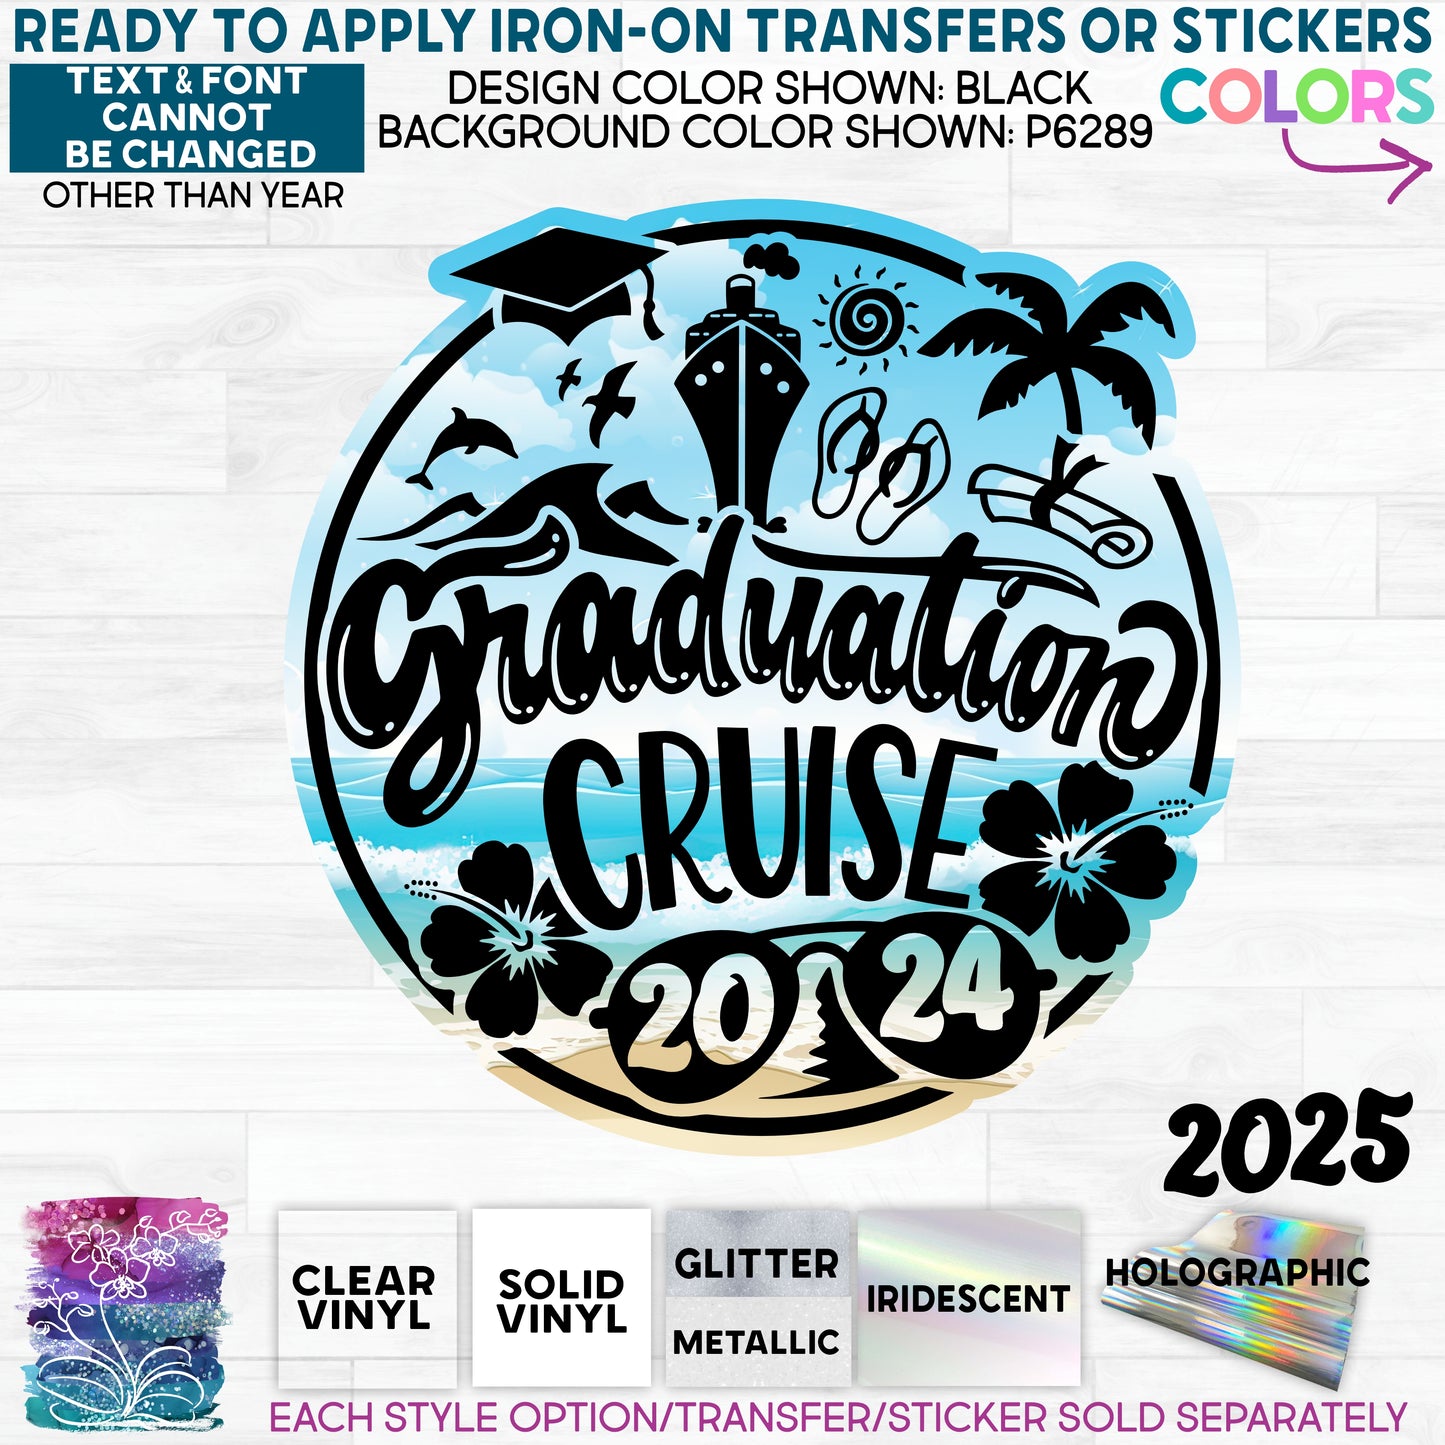 SBS-329-V Graduation Cruise 2023 2024 2025 Any Year Made-to-Order Iron-On Transfer or Sticker